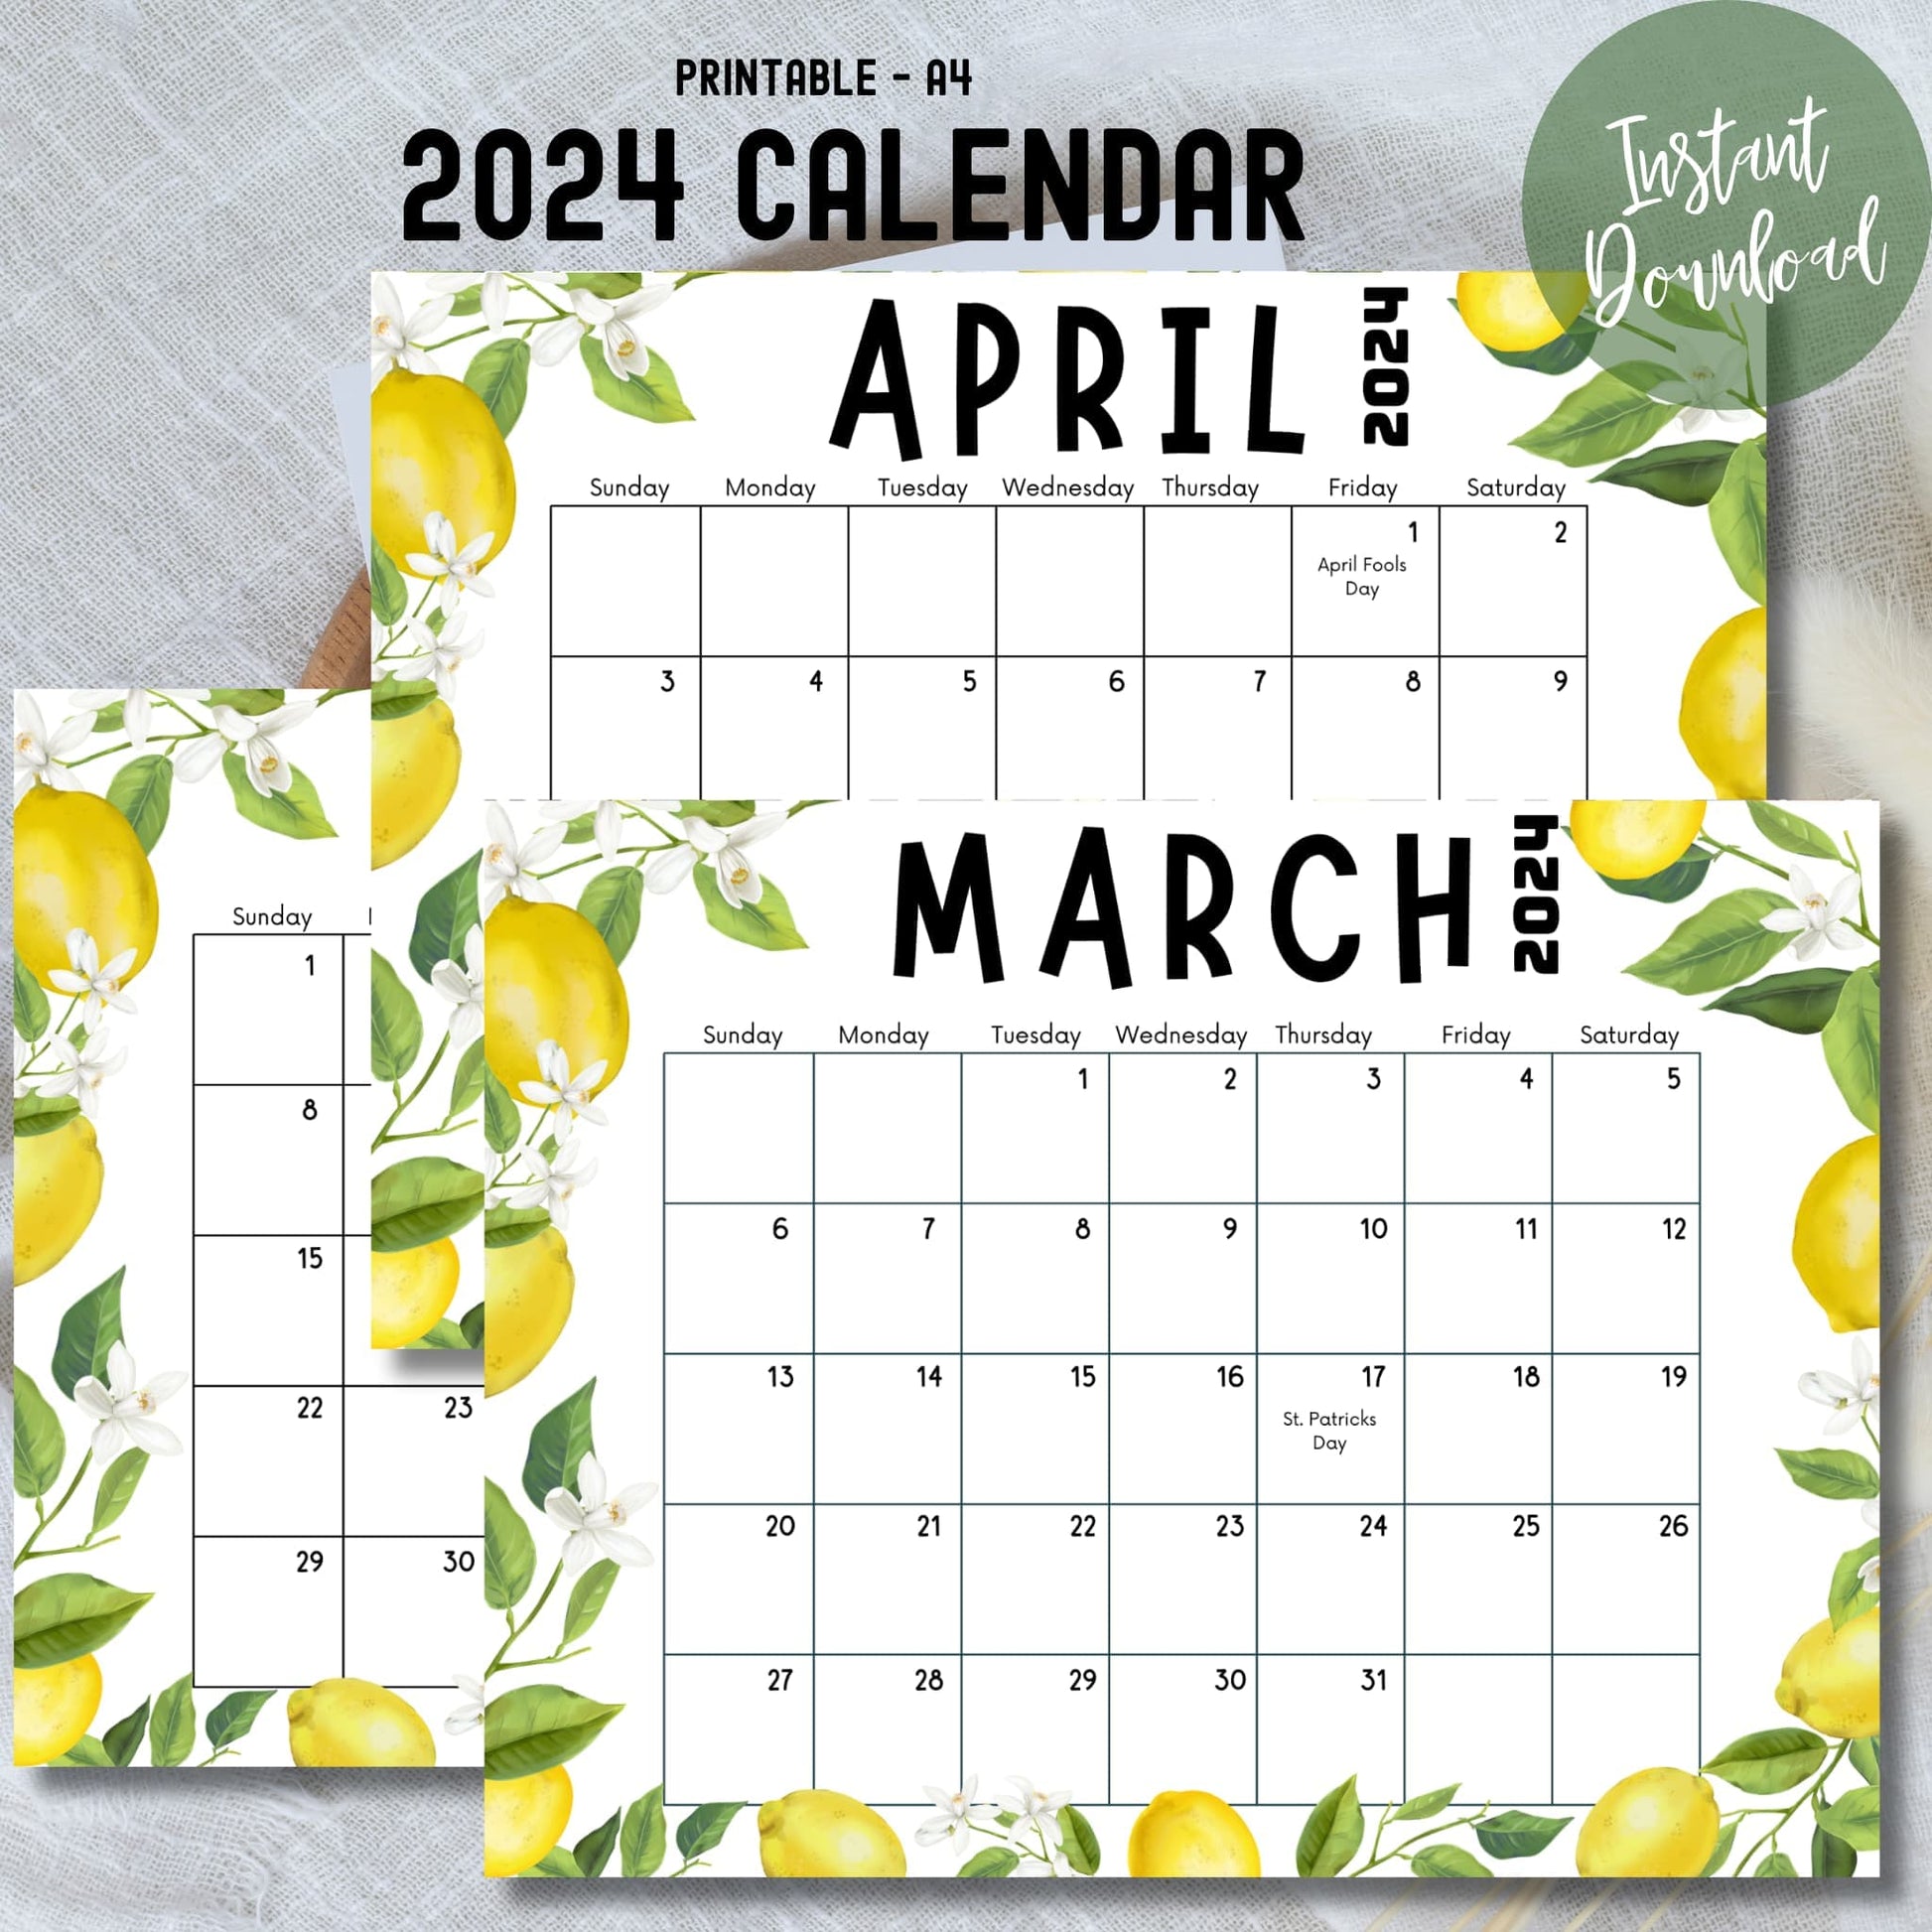 Printed sheets of March, April, and May 2024 calendars with lemon and leaves background on a white plain sheet, symbolizing fresh spring beginnings.